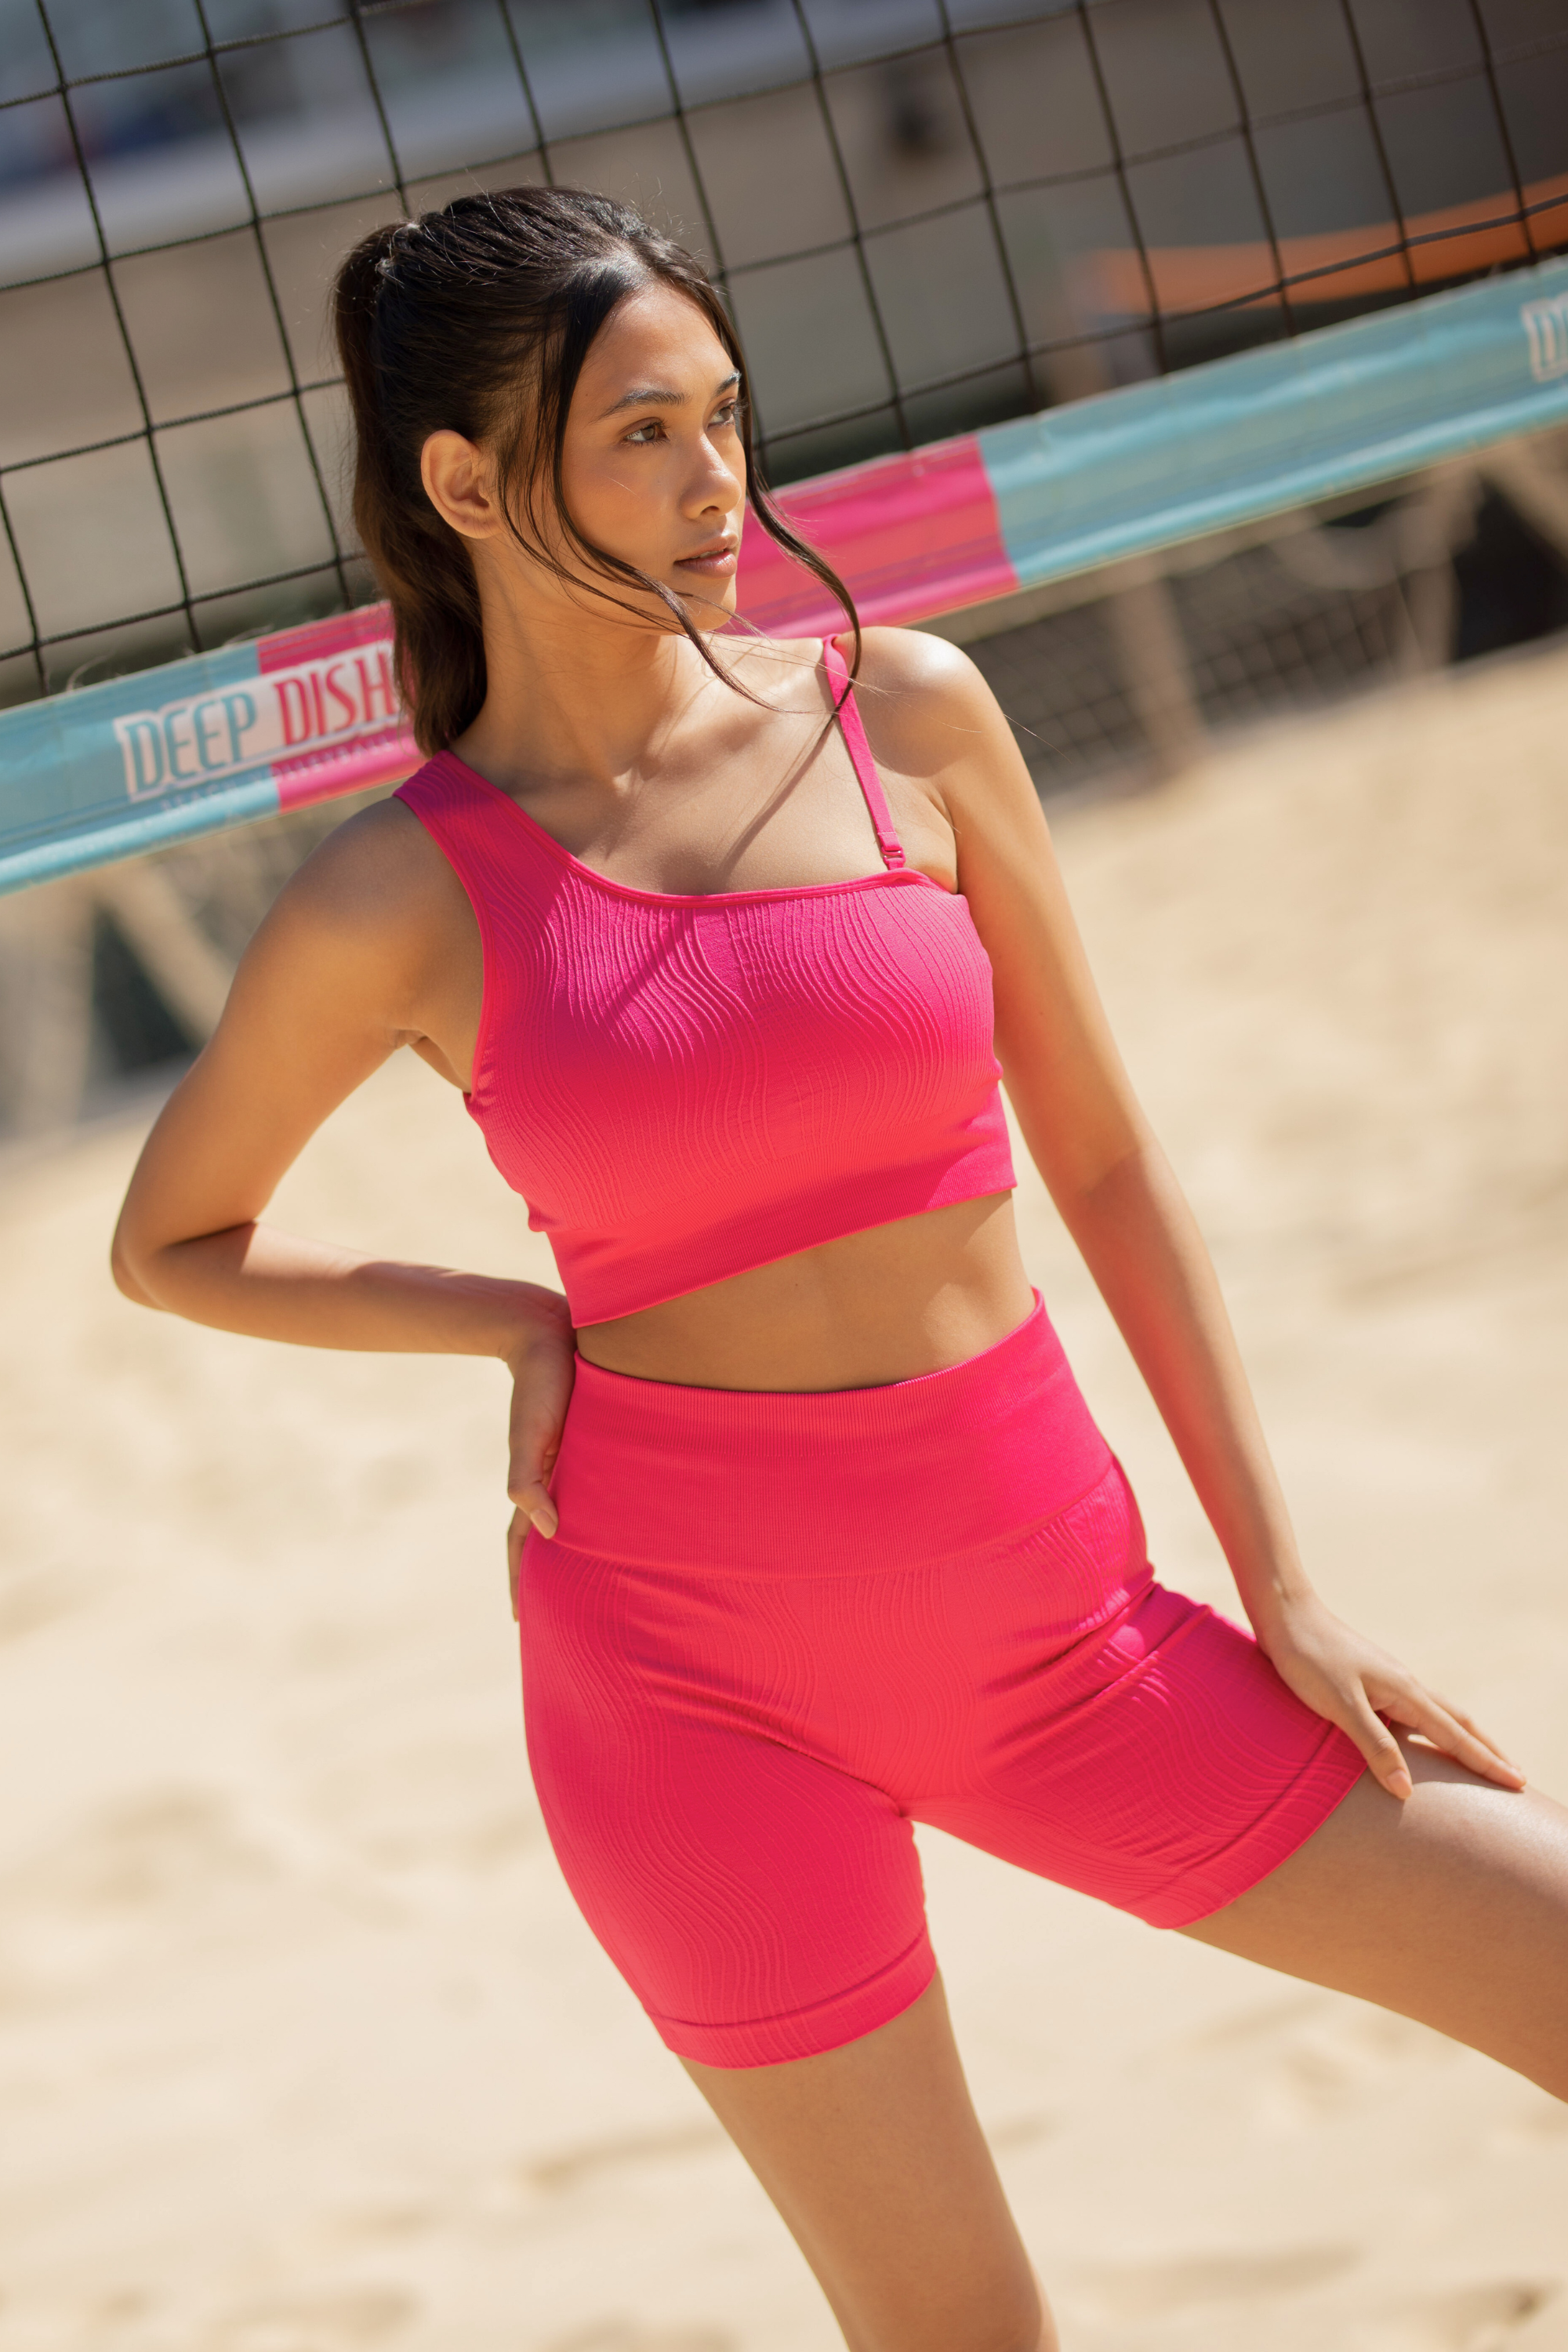 Model wearing pink leggings and pink supportive sports bra for sustainable activewear brand, Jilla.